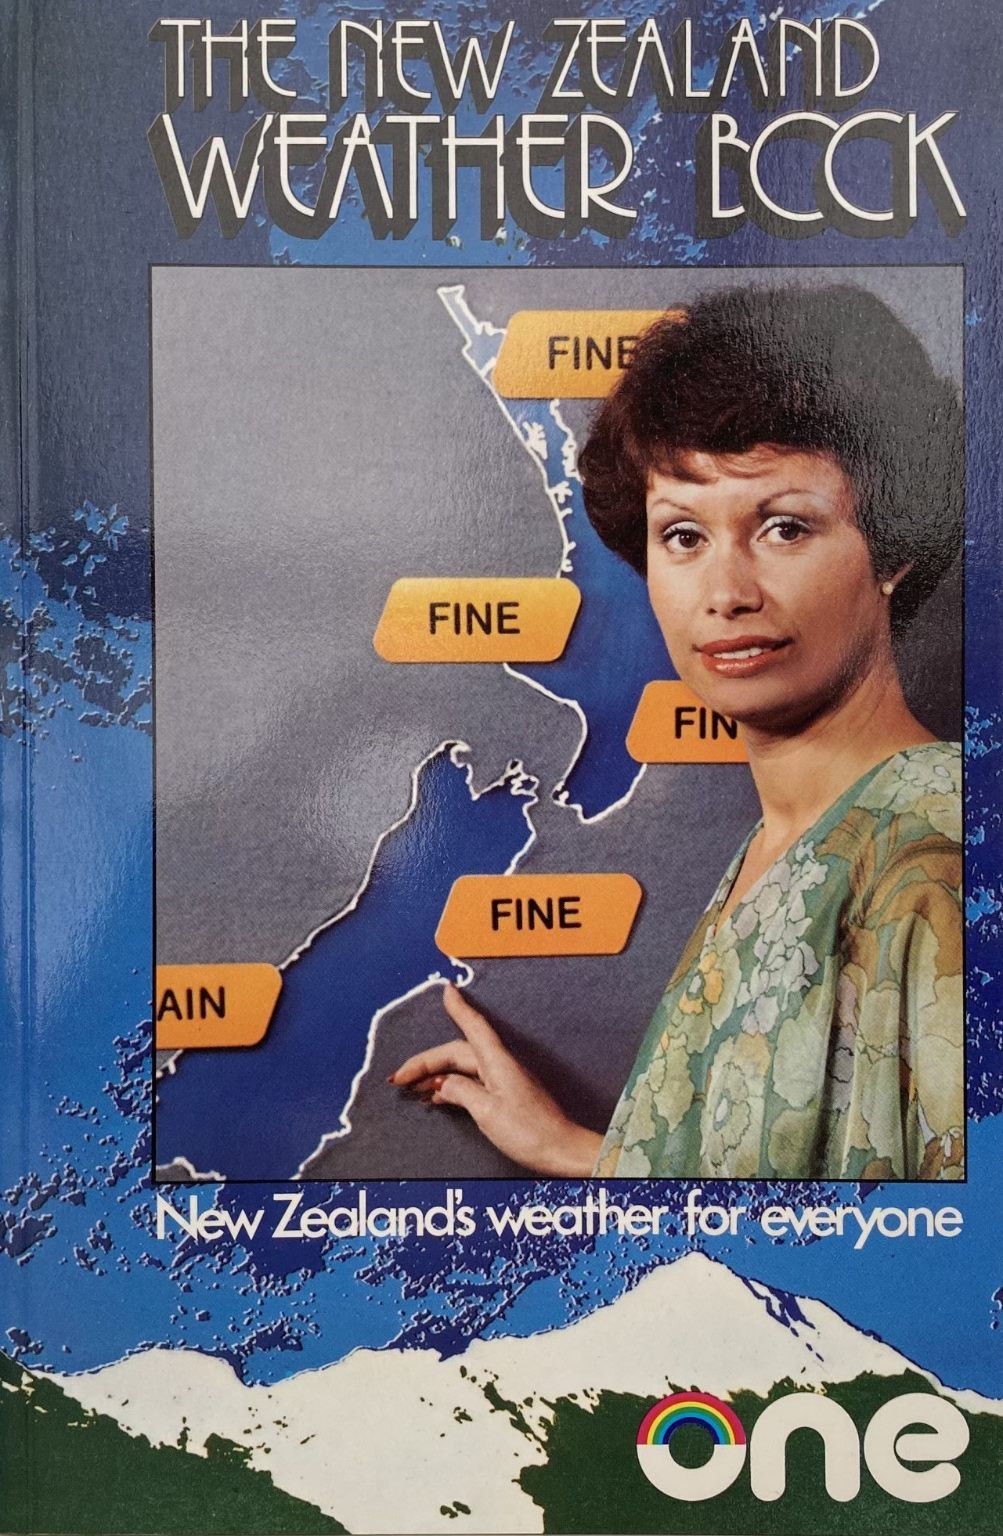 THE NEW ZEALAND WEATHER BOOK: New Zealand's weather for everyone